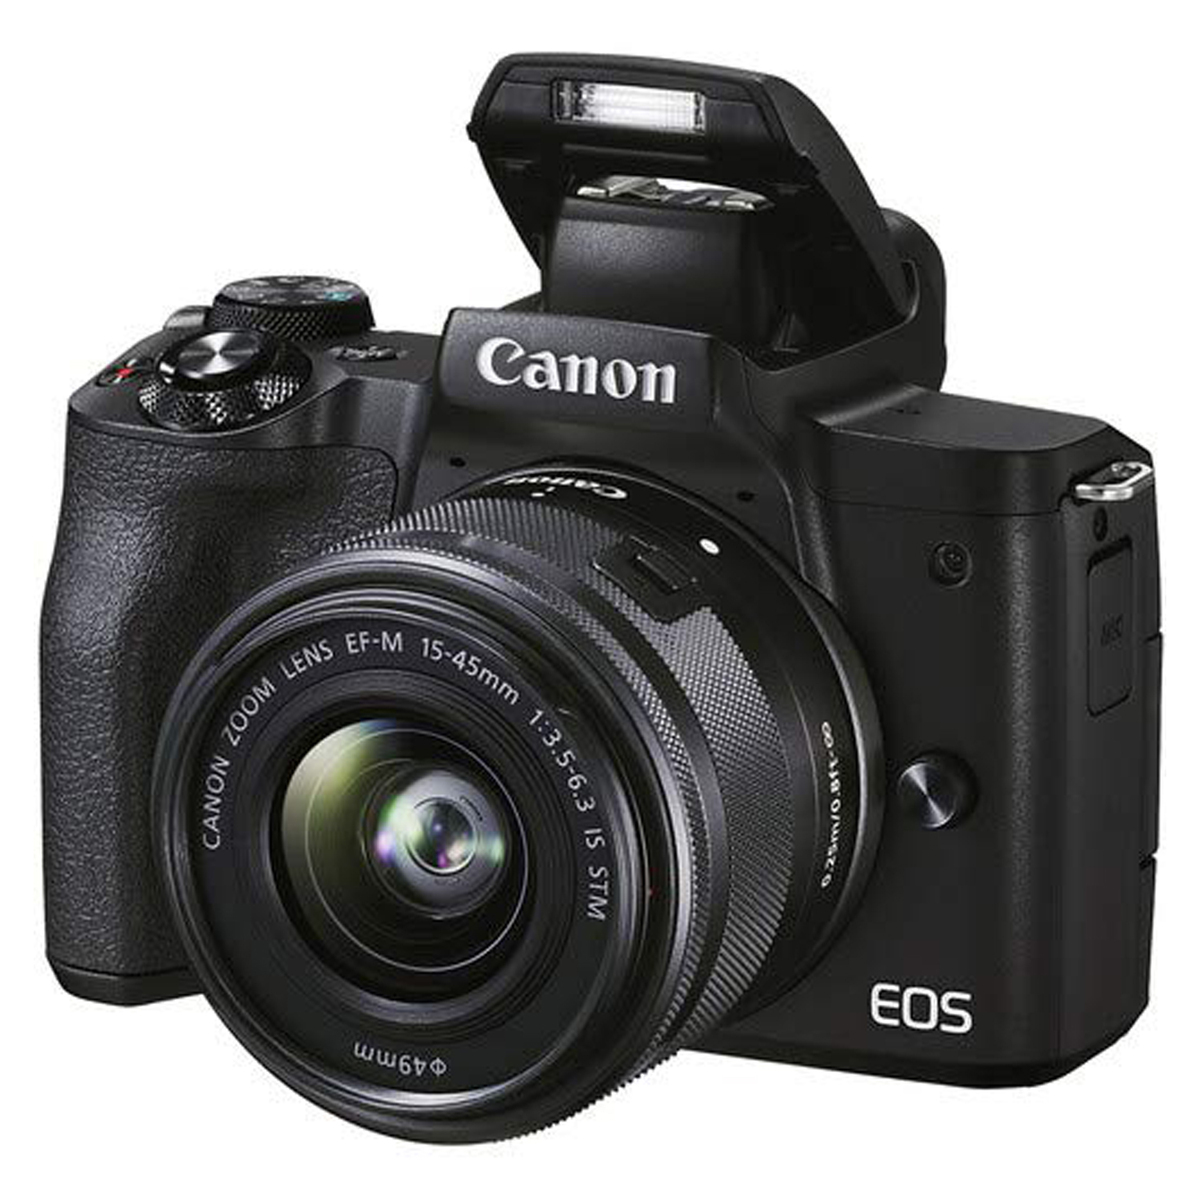 Canon EOS M50 Mark II 15-45mm f/3.5-6.3 IS STM DSLR Camera